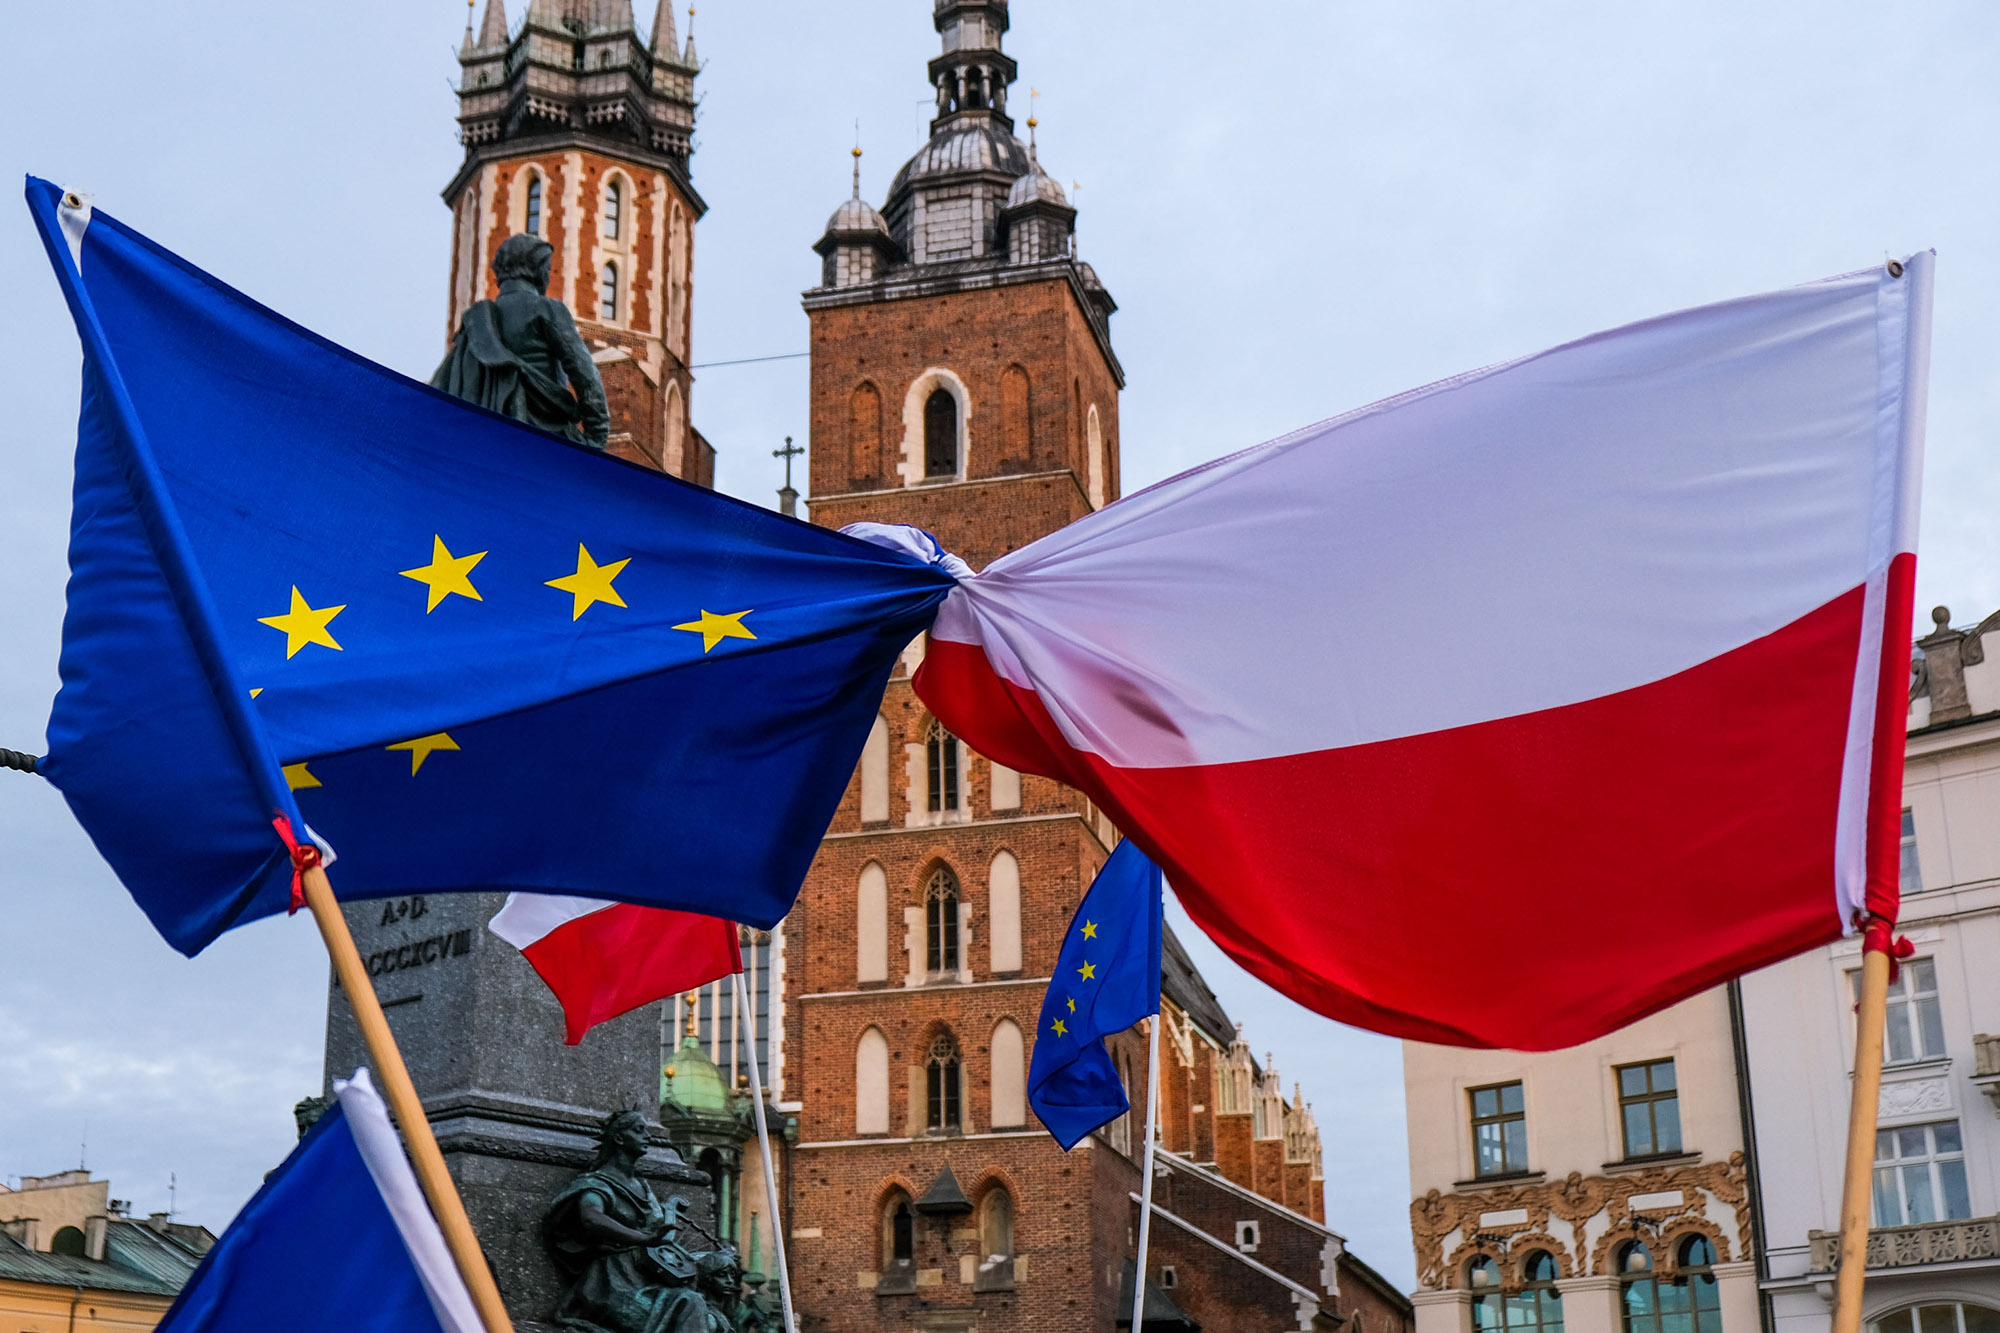 European Union and Polish flags seen during the